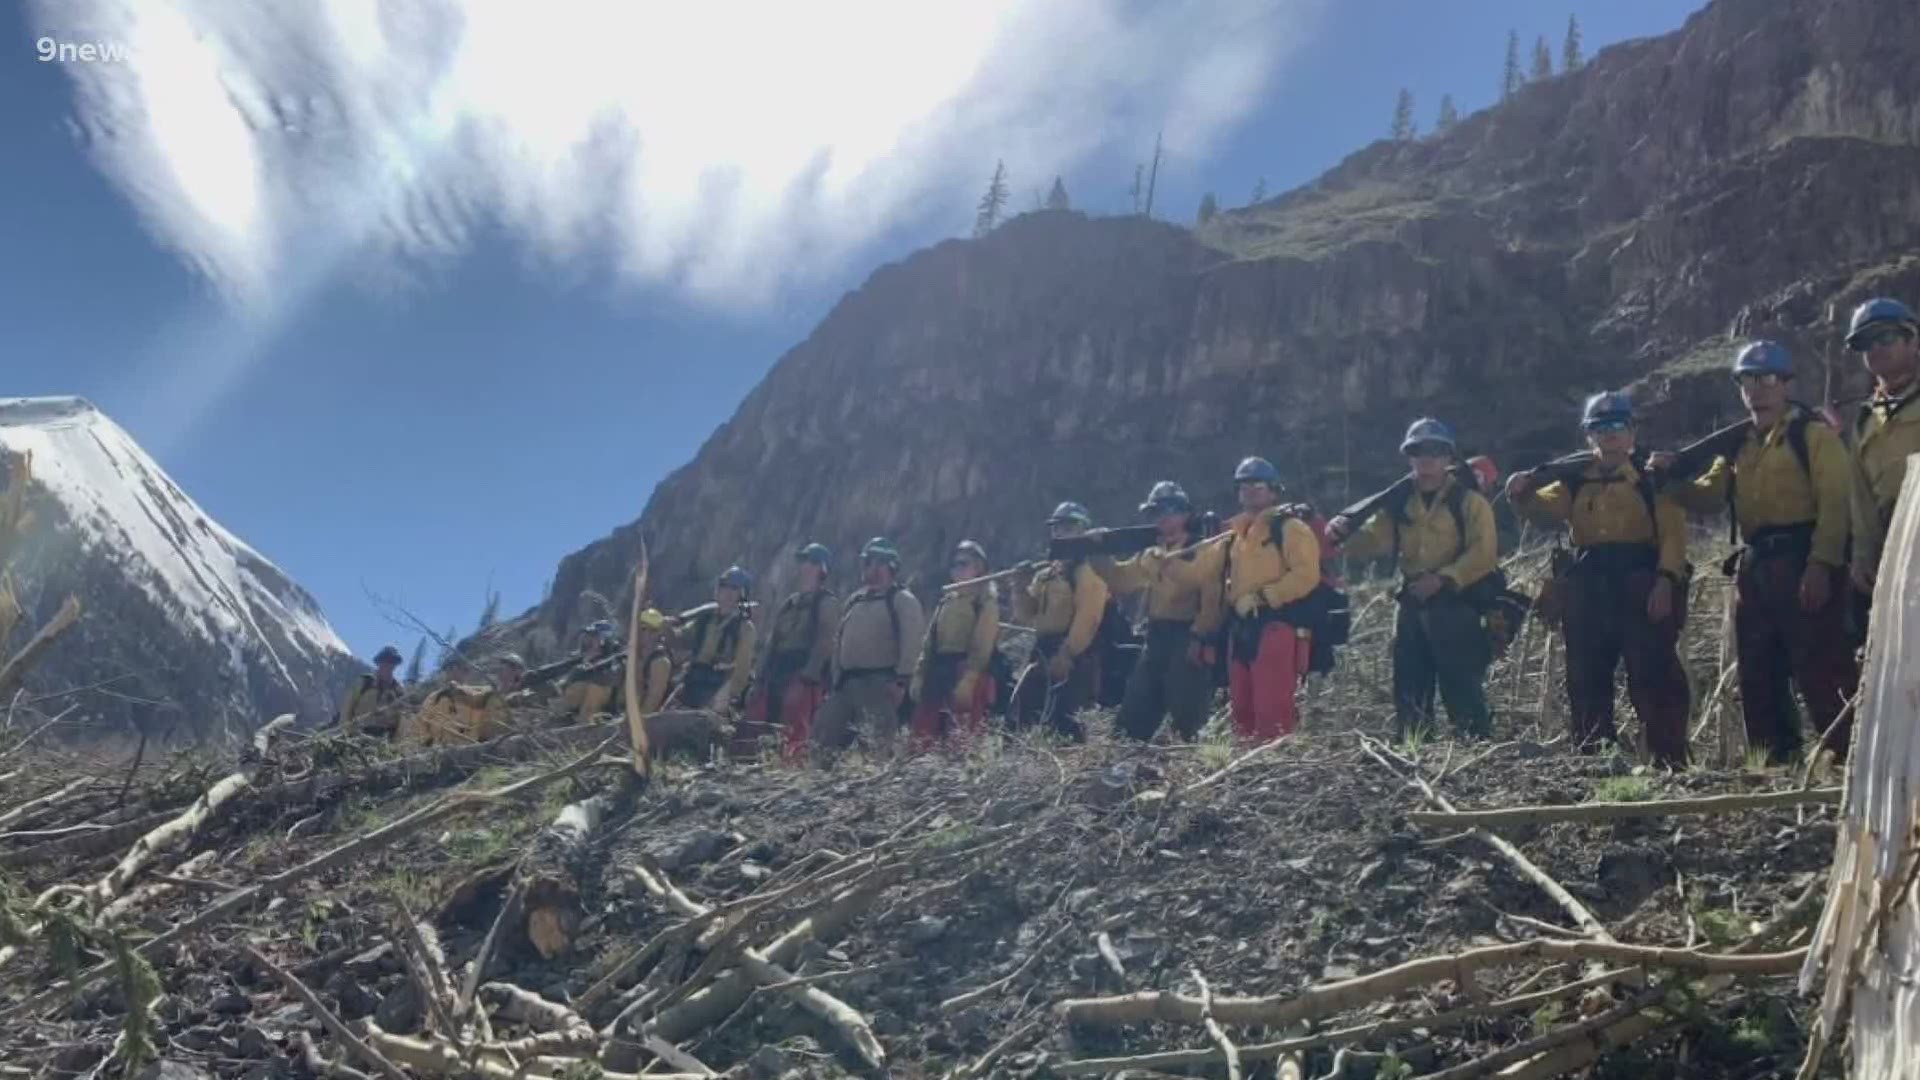 Scientists are studying downed trees to find answers to the state's historic avalanche season in 2019.